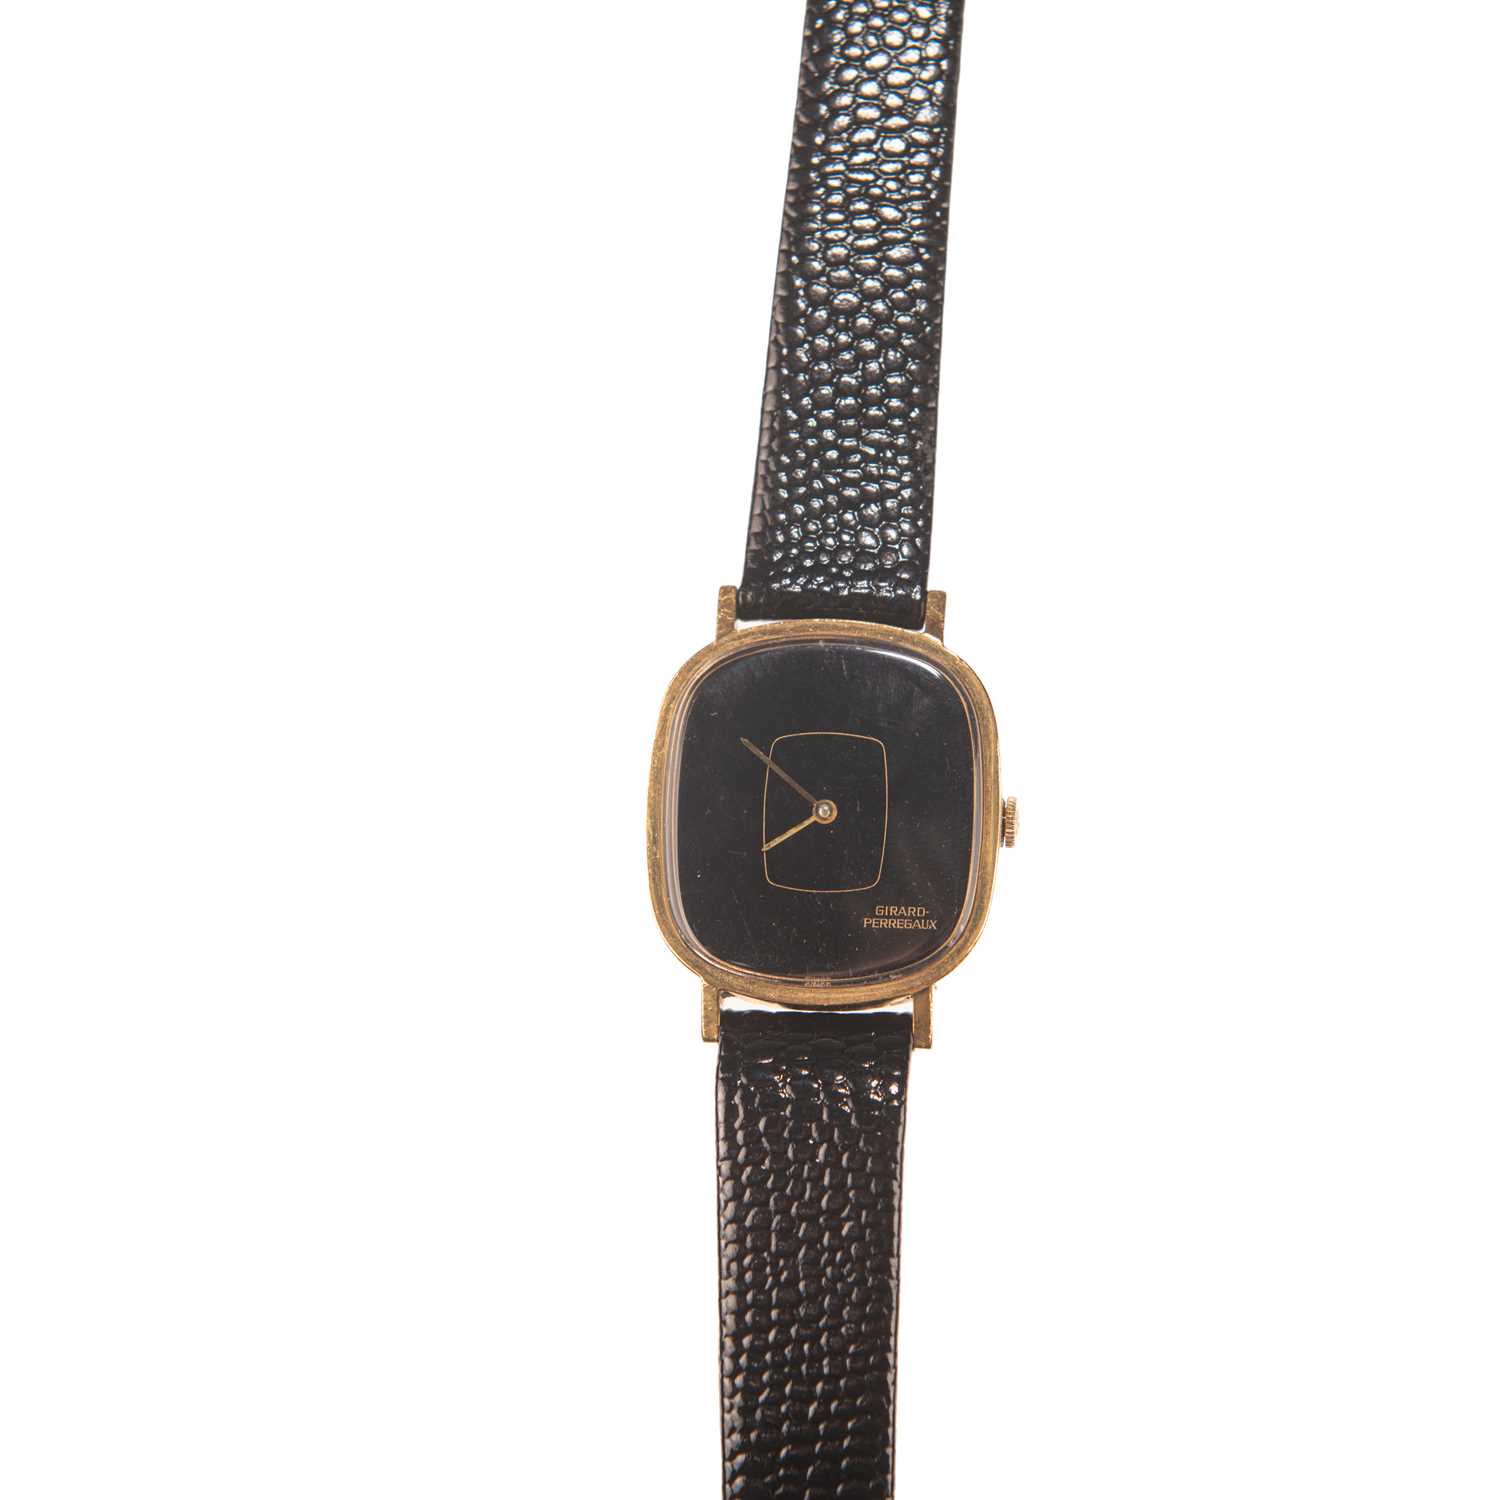 A GENTS GOLD PLATED GIRARD PERREGAUX STRAP WATCH